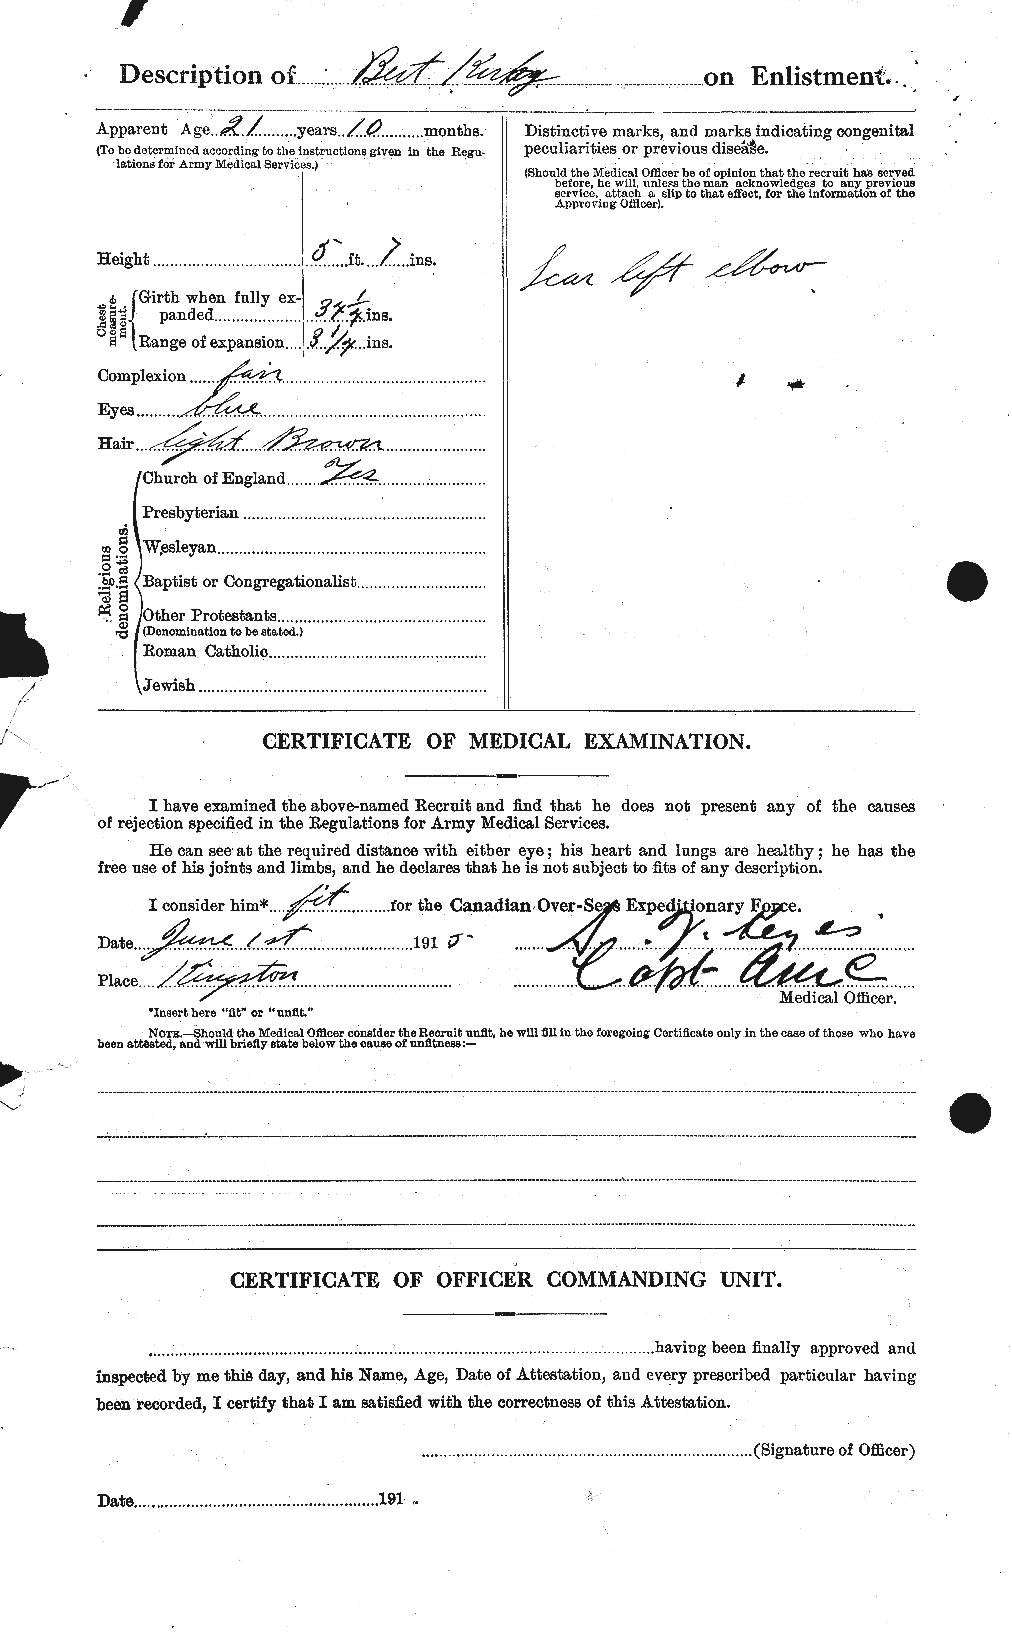 Personnel Records of the First World War - CEF 437160b